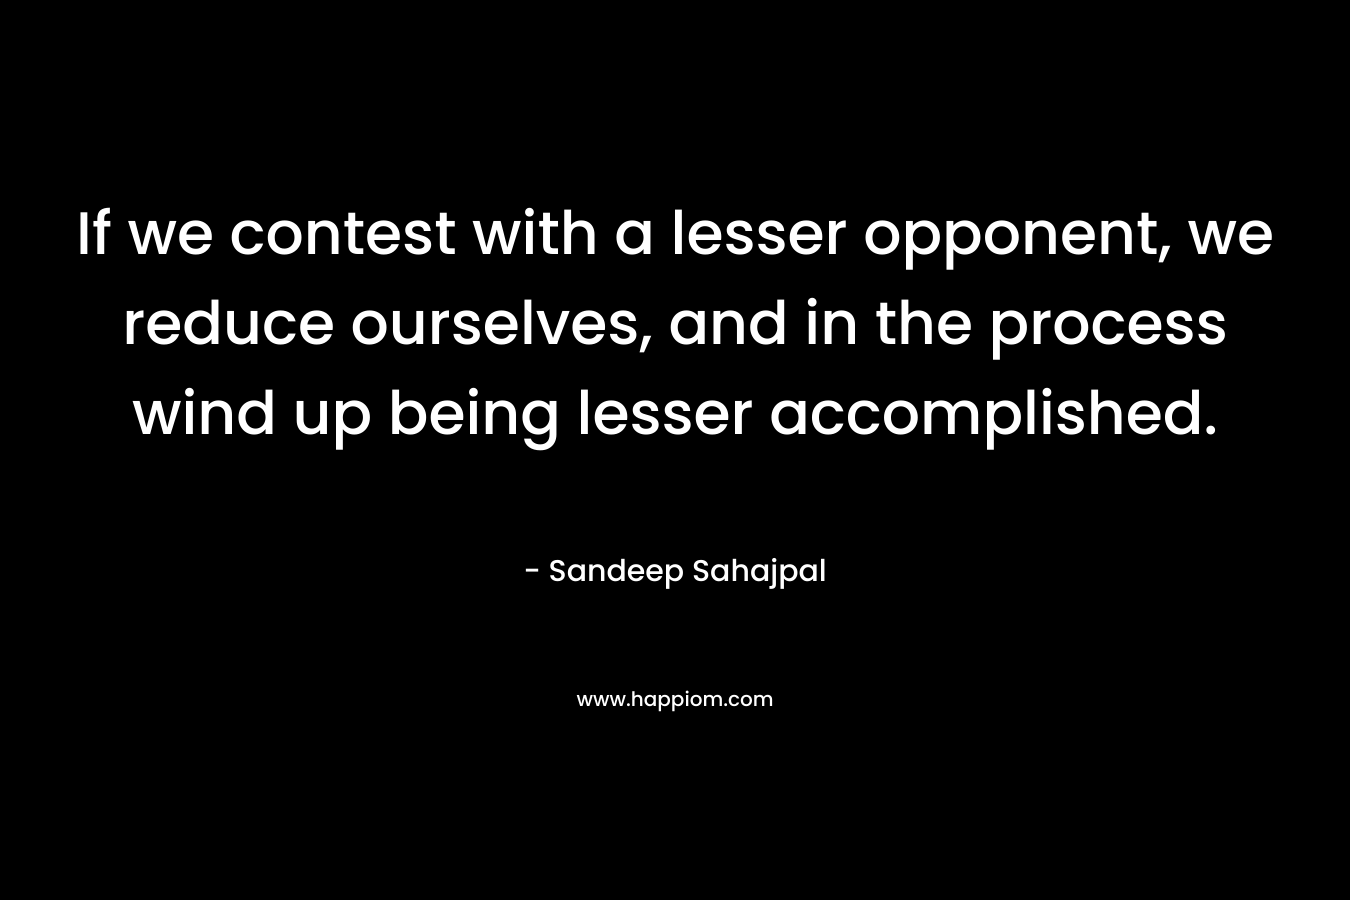 If we contest with a lesser opponent, we reduce ourselves, and in the process wind up being lesser accomplished.